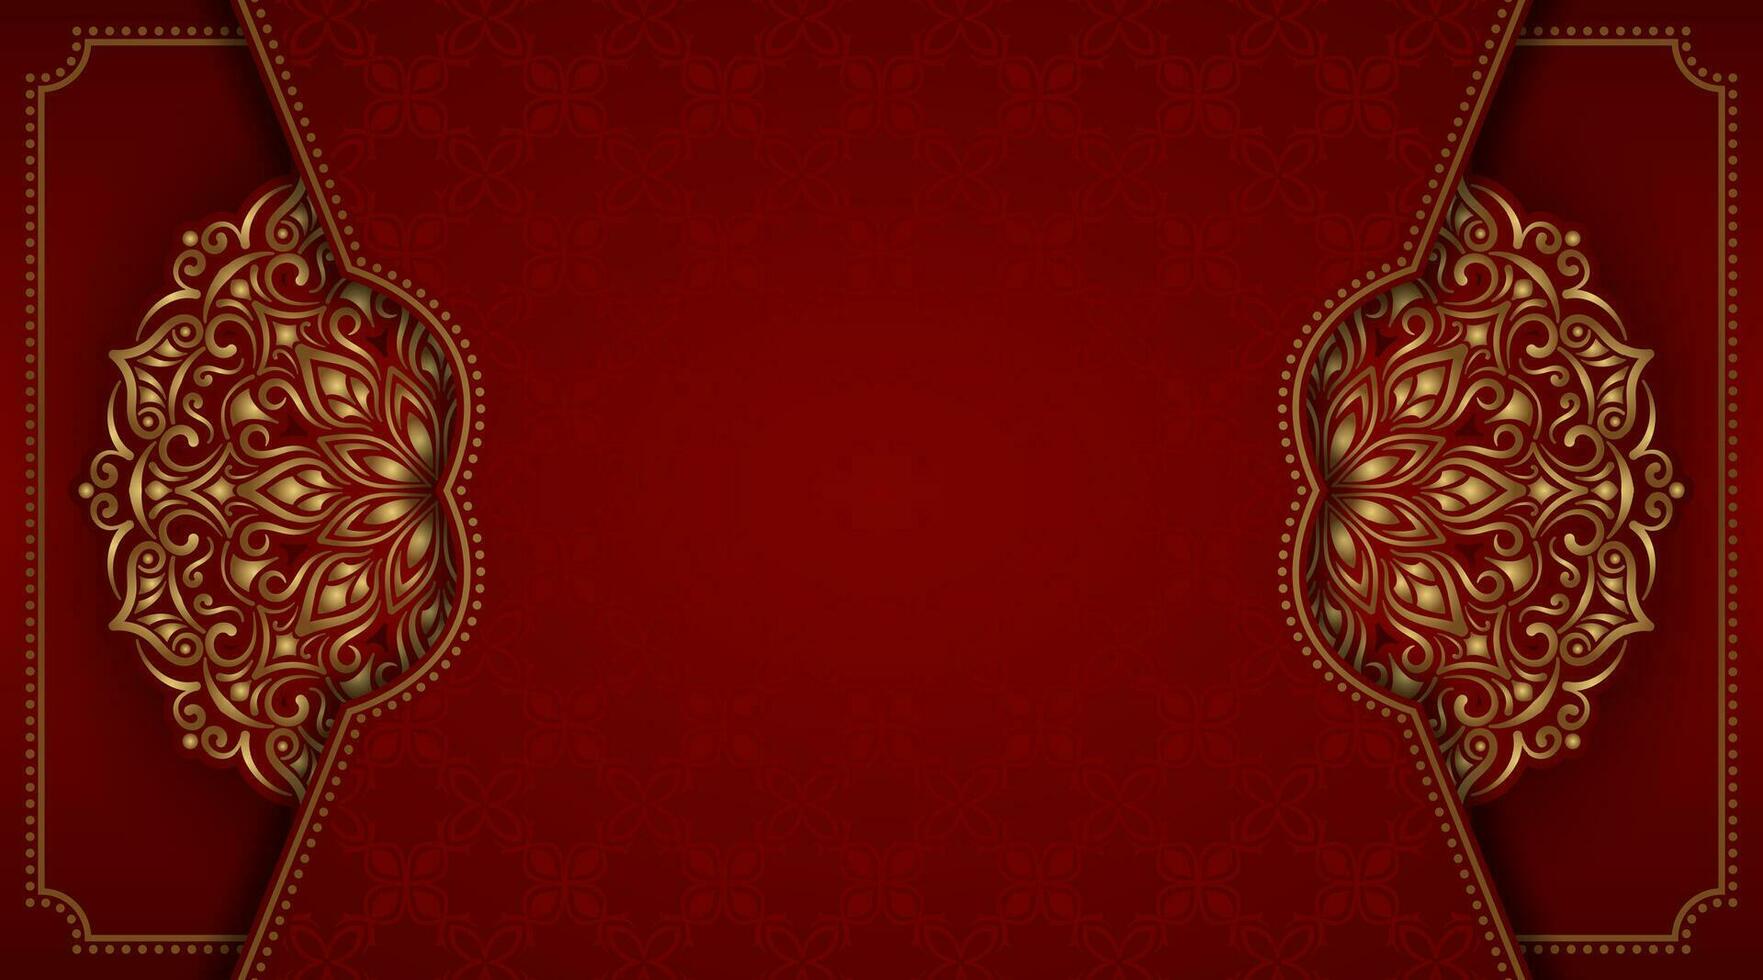 ornamental red background, with gold mandala decoration vector